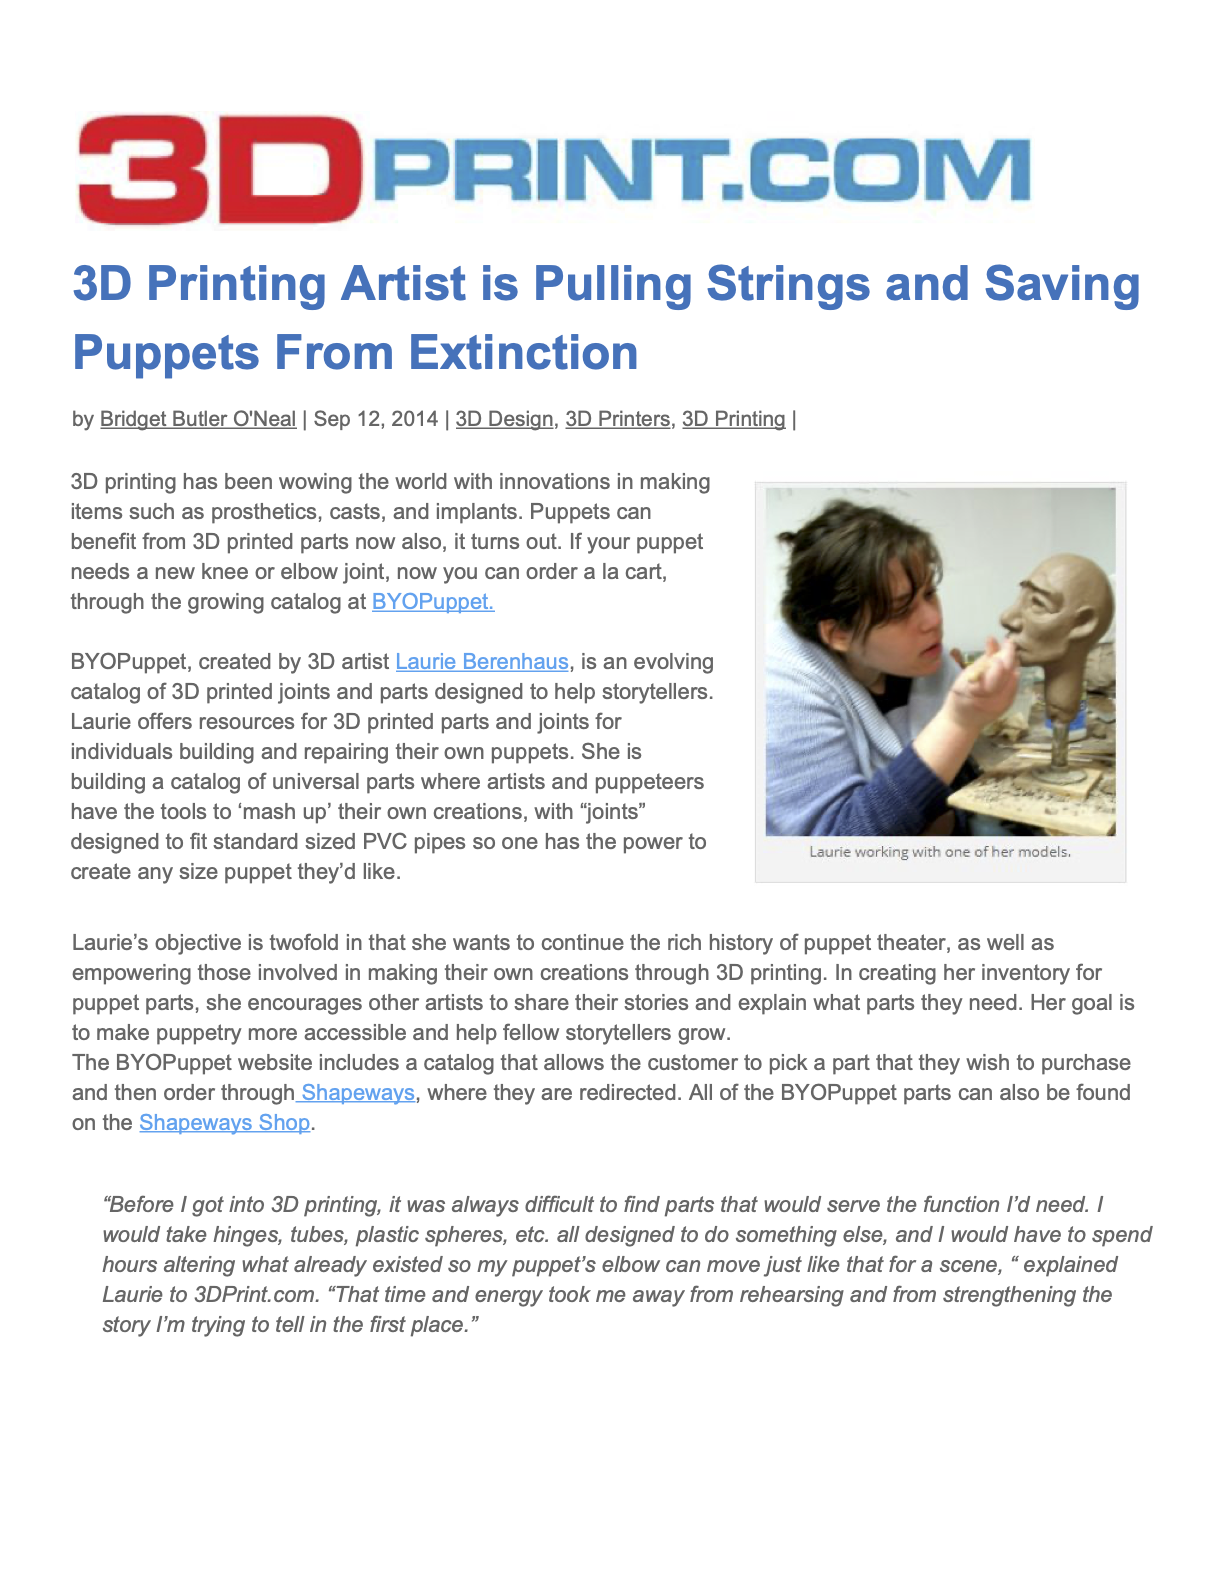 Bridget O'Neil, 3D Printing Artist is Pulling Strings & Saving Puppetry from Extinction, 2014